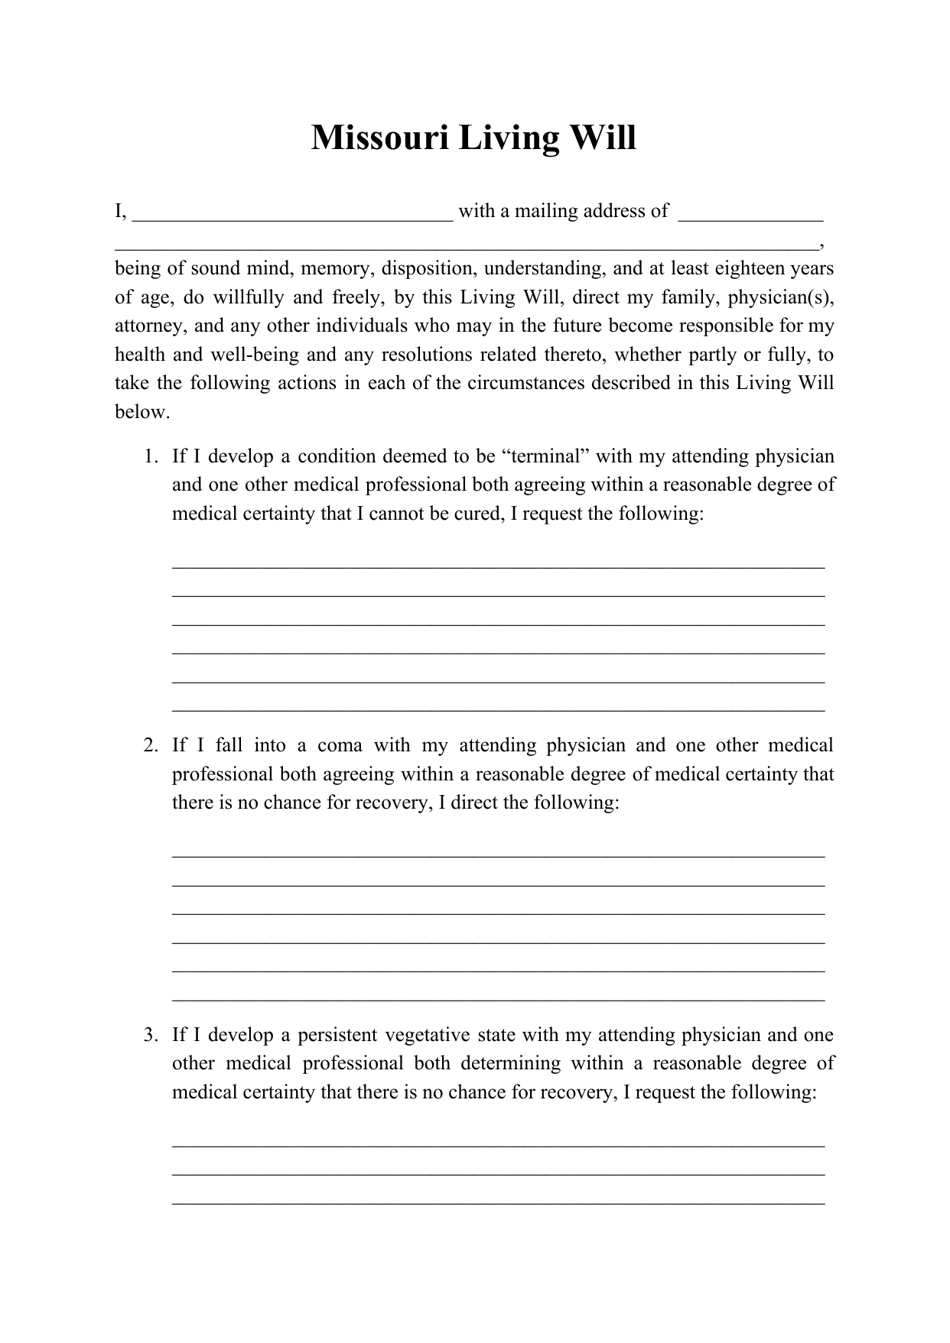 Missouri Living Will Form Fill Out Sign Online and Download PDF